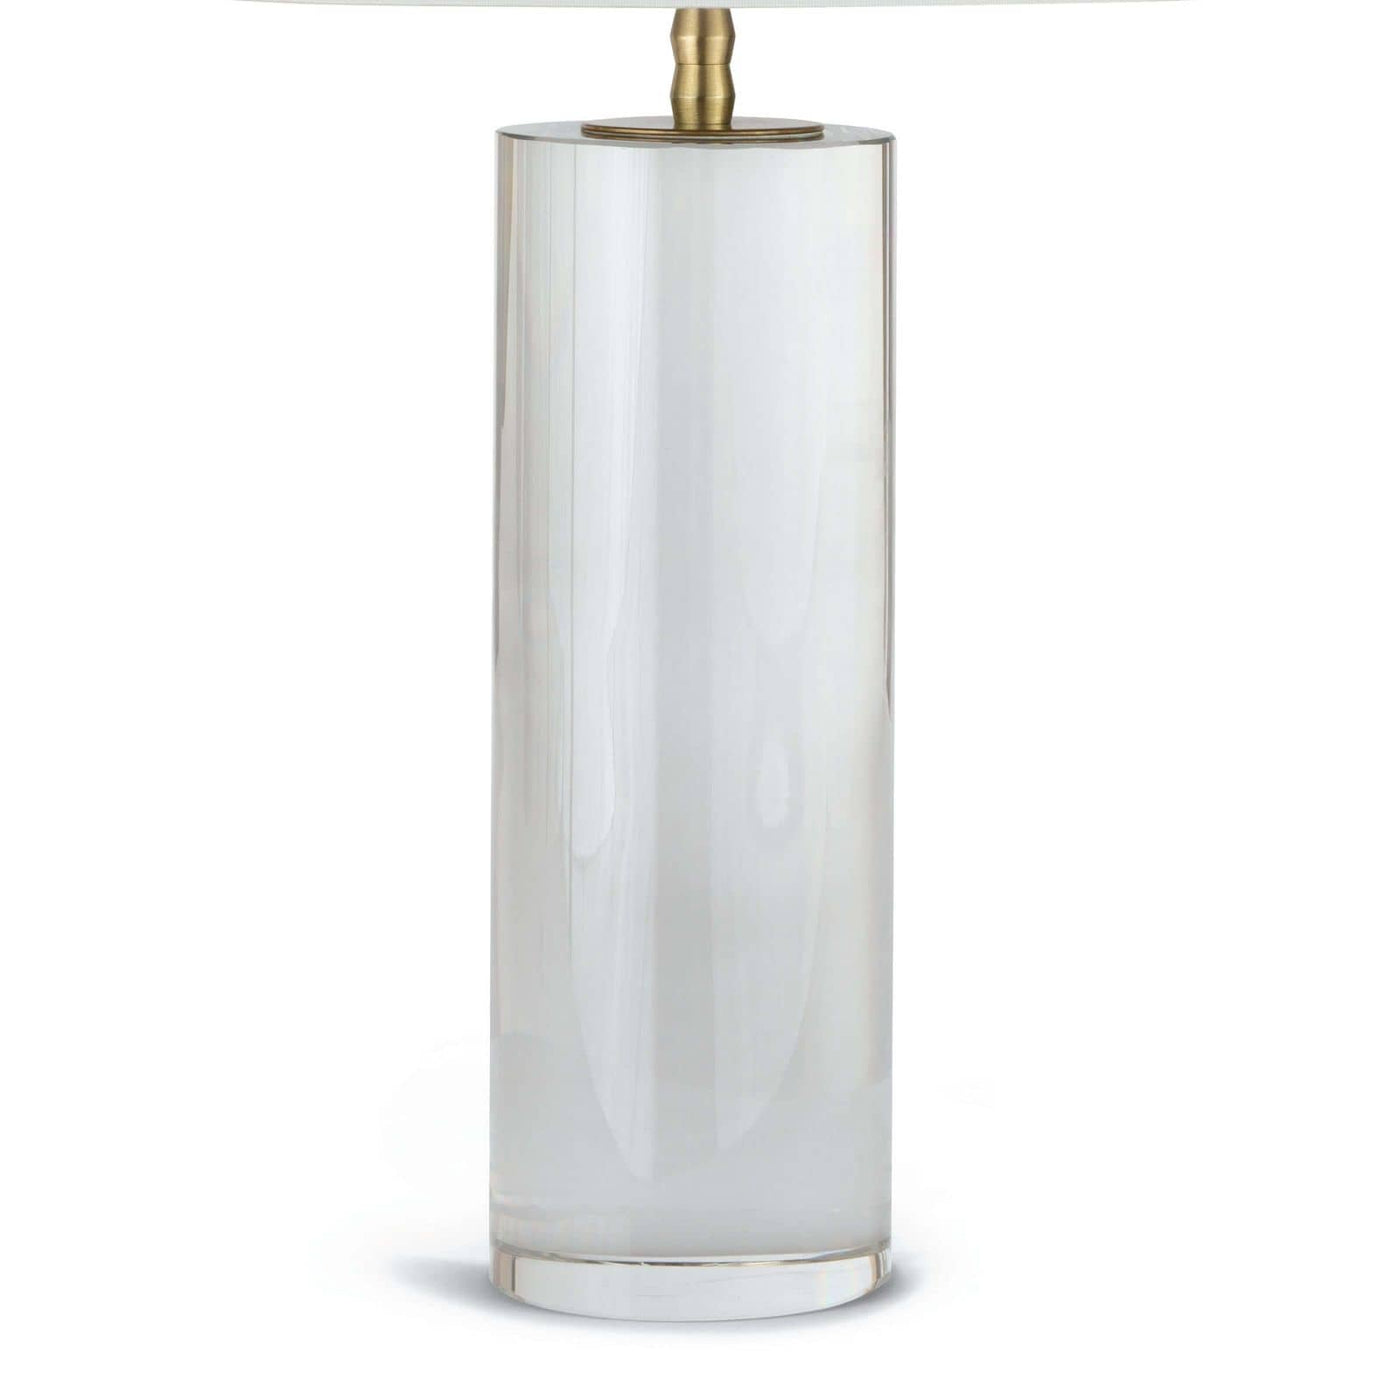 Juliet Crystal Table Lamp Large